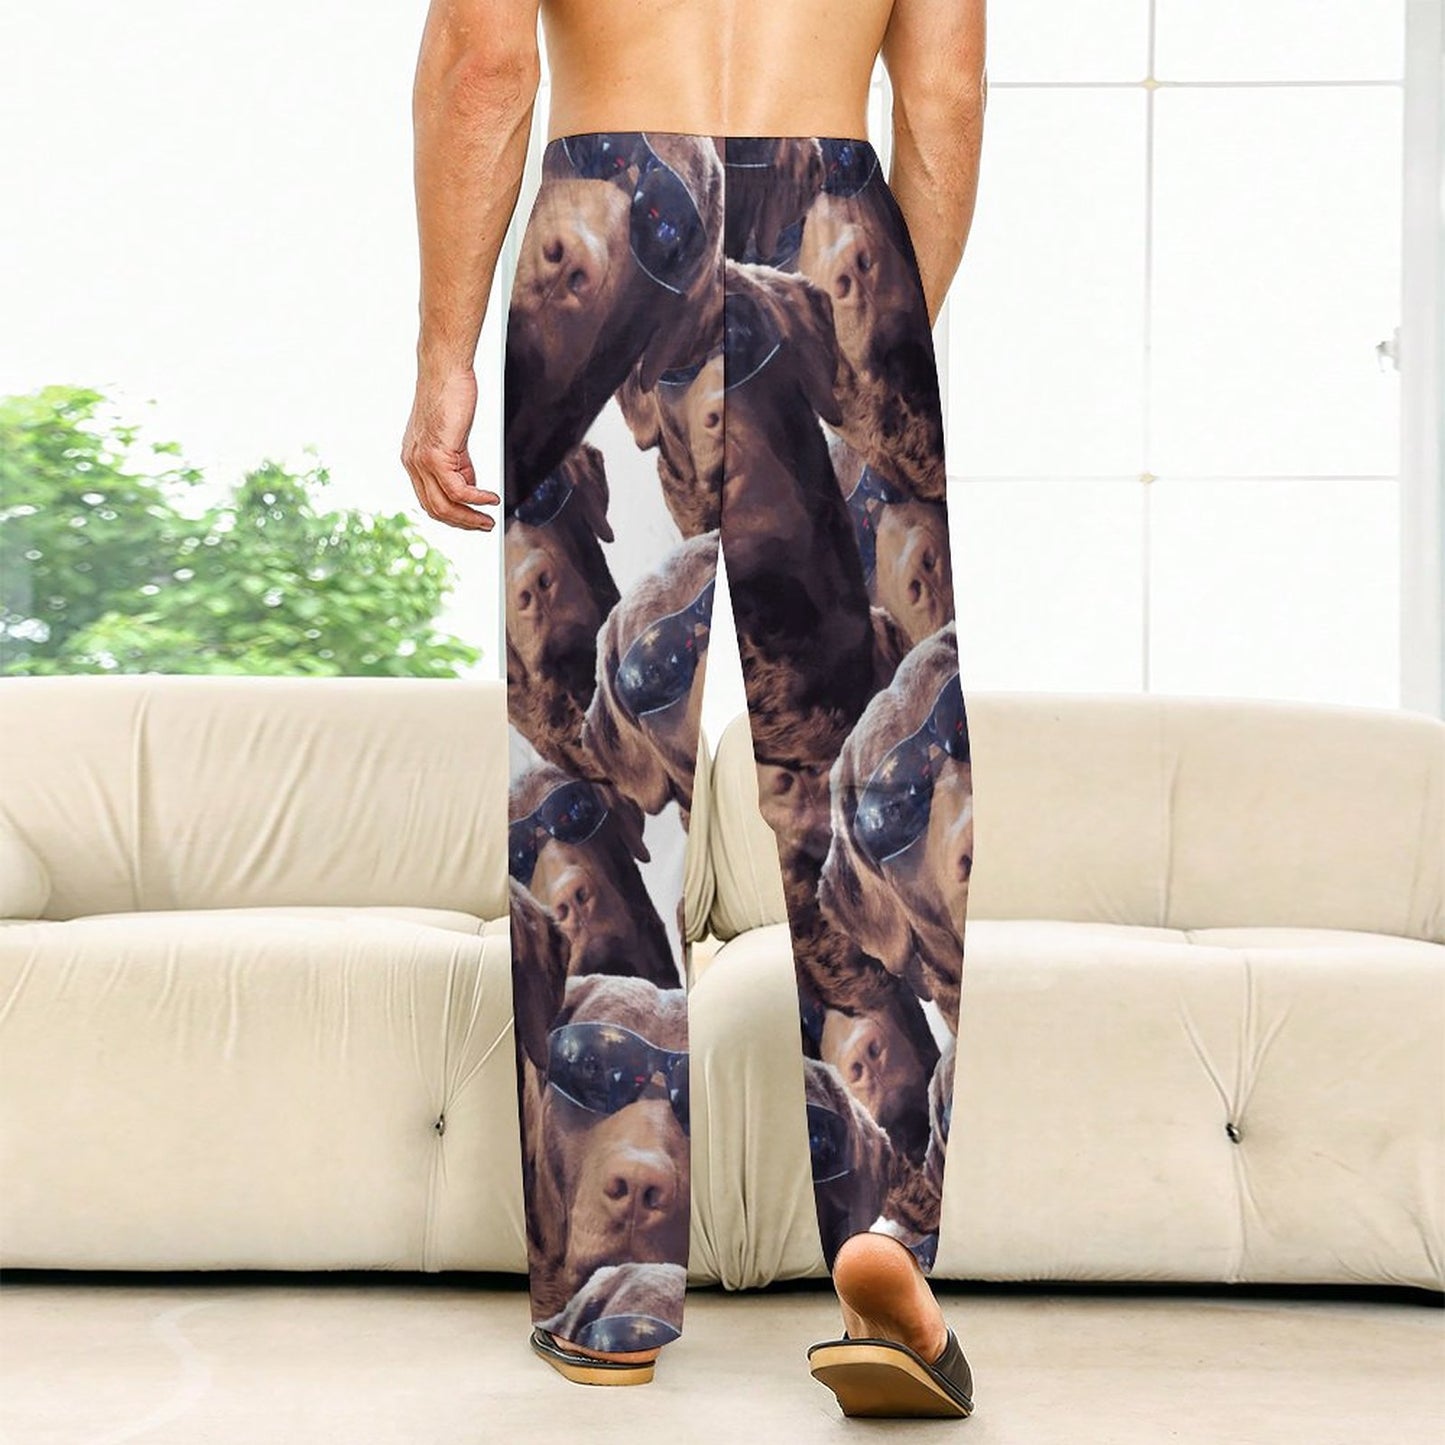 FOXY LADY _ LAB _ COLLAGE FACE DESIGN -Women's Home Pajamas Pants